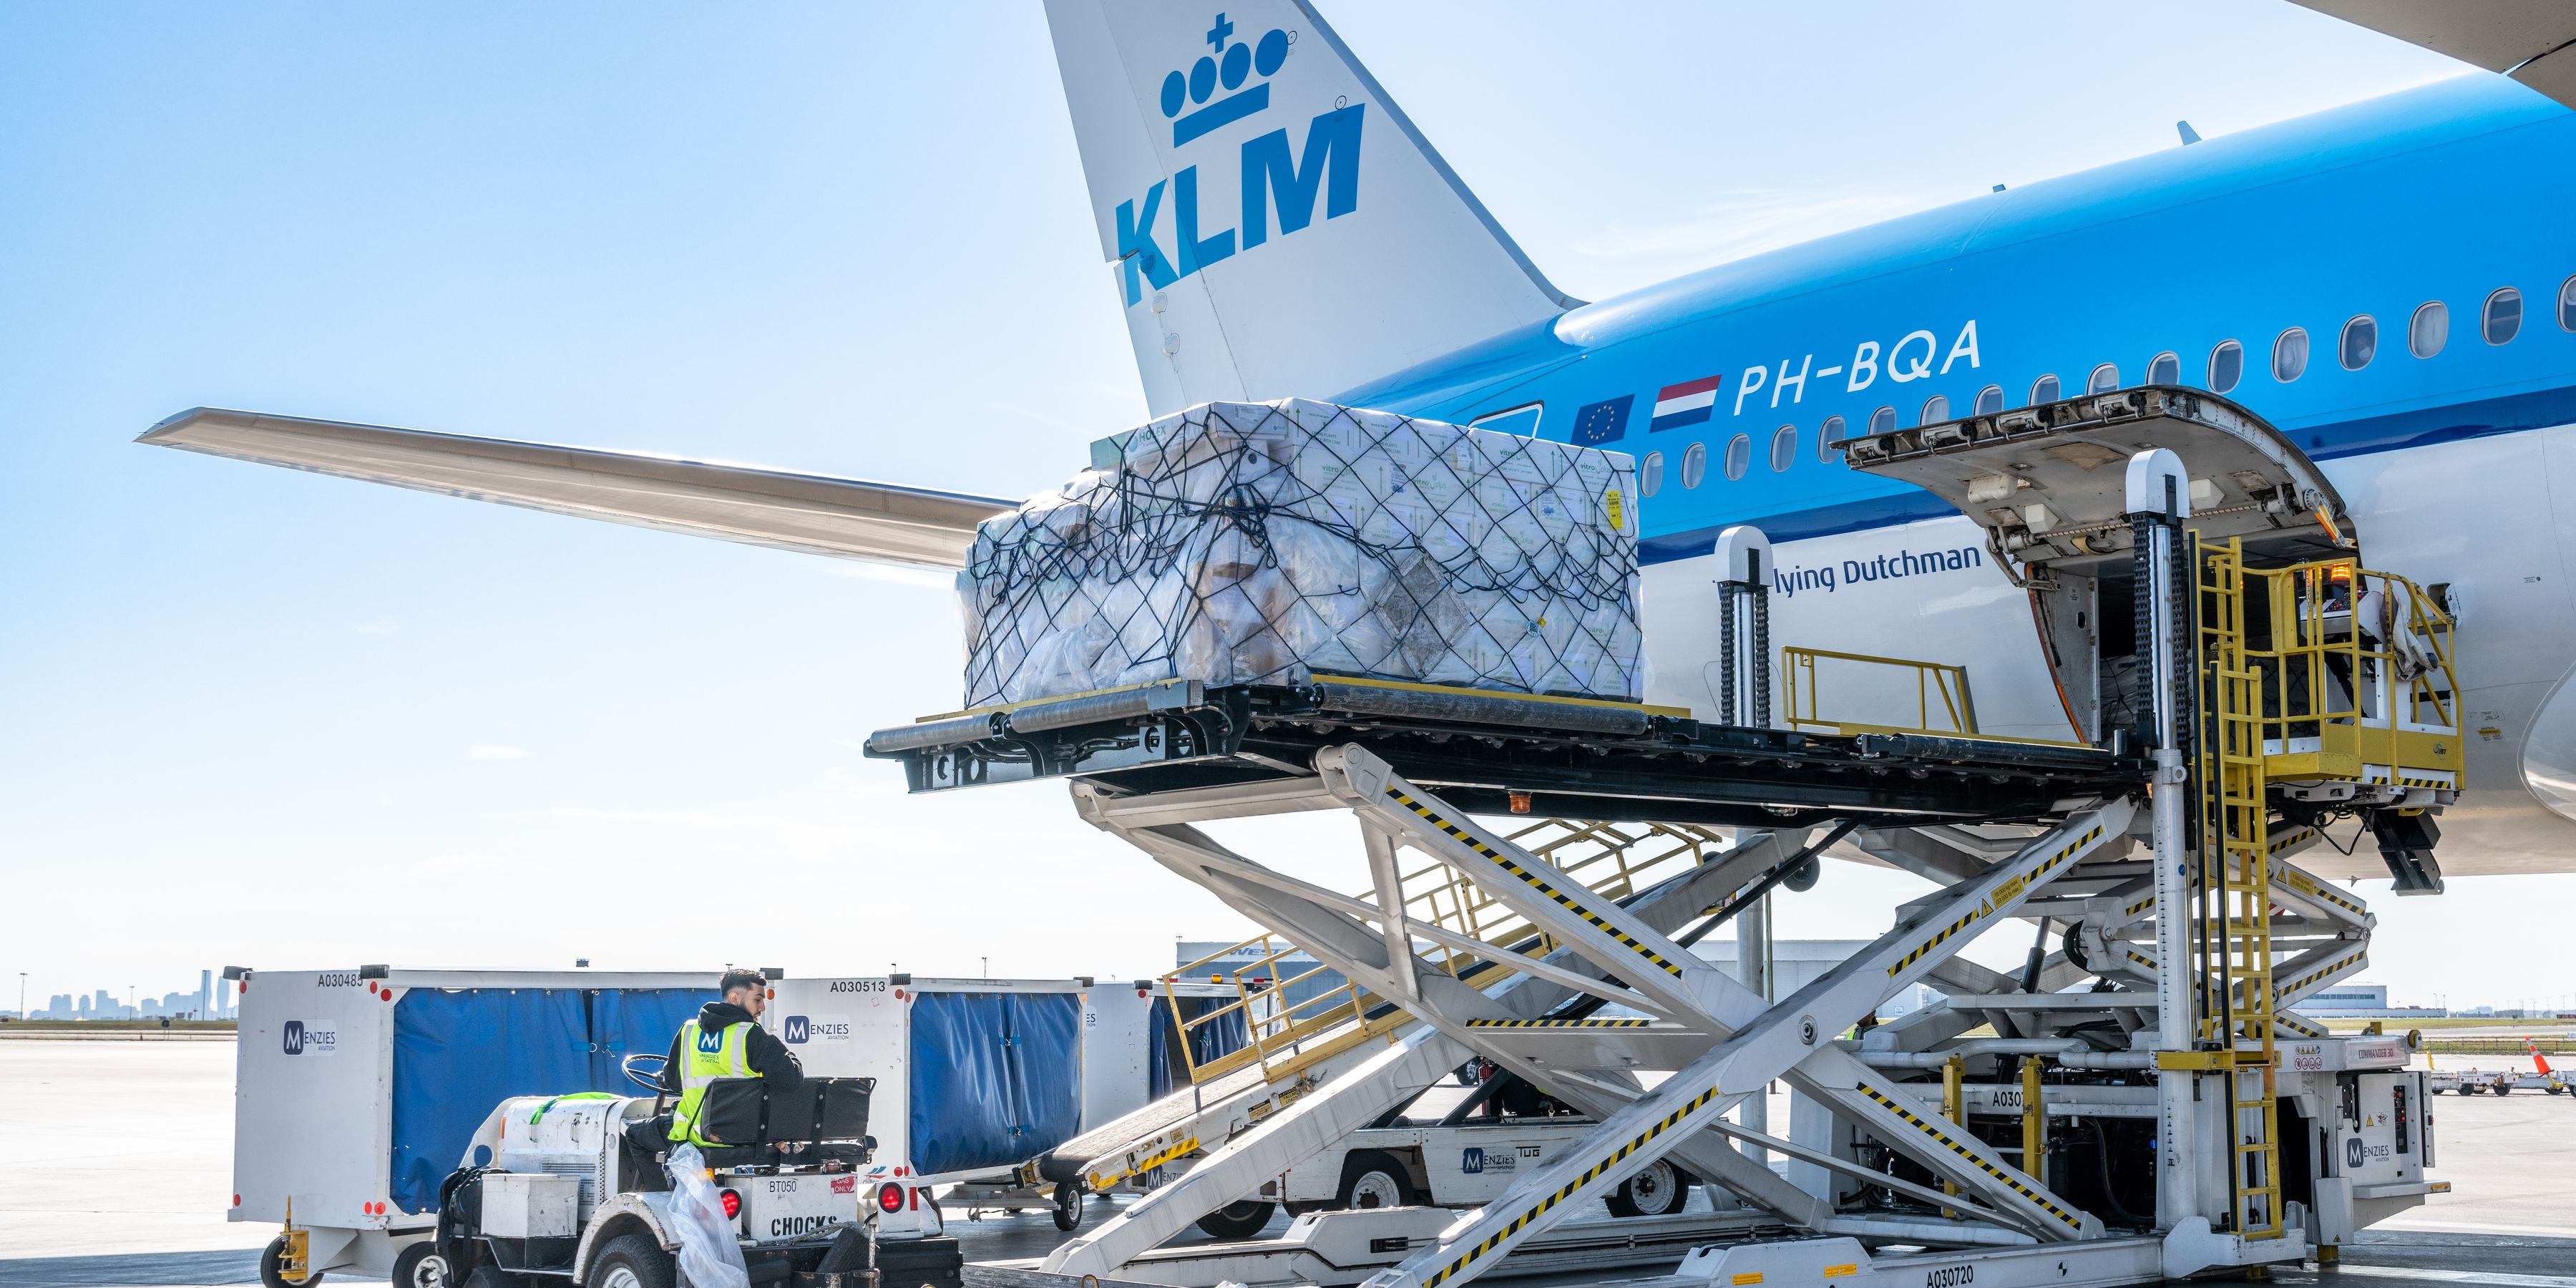 Cargo loaded on aircraft